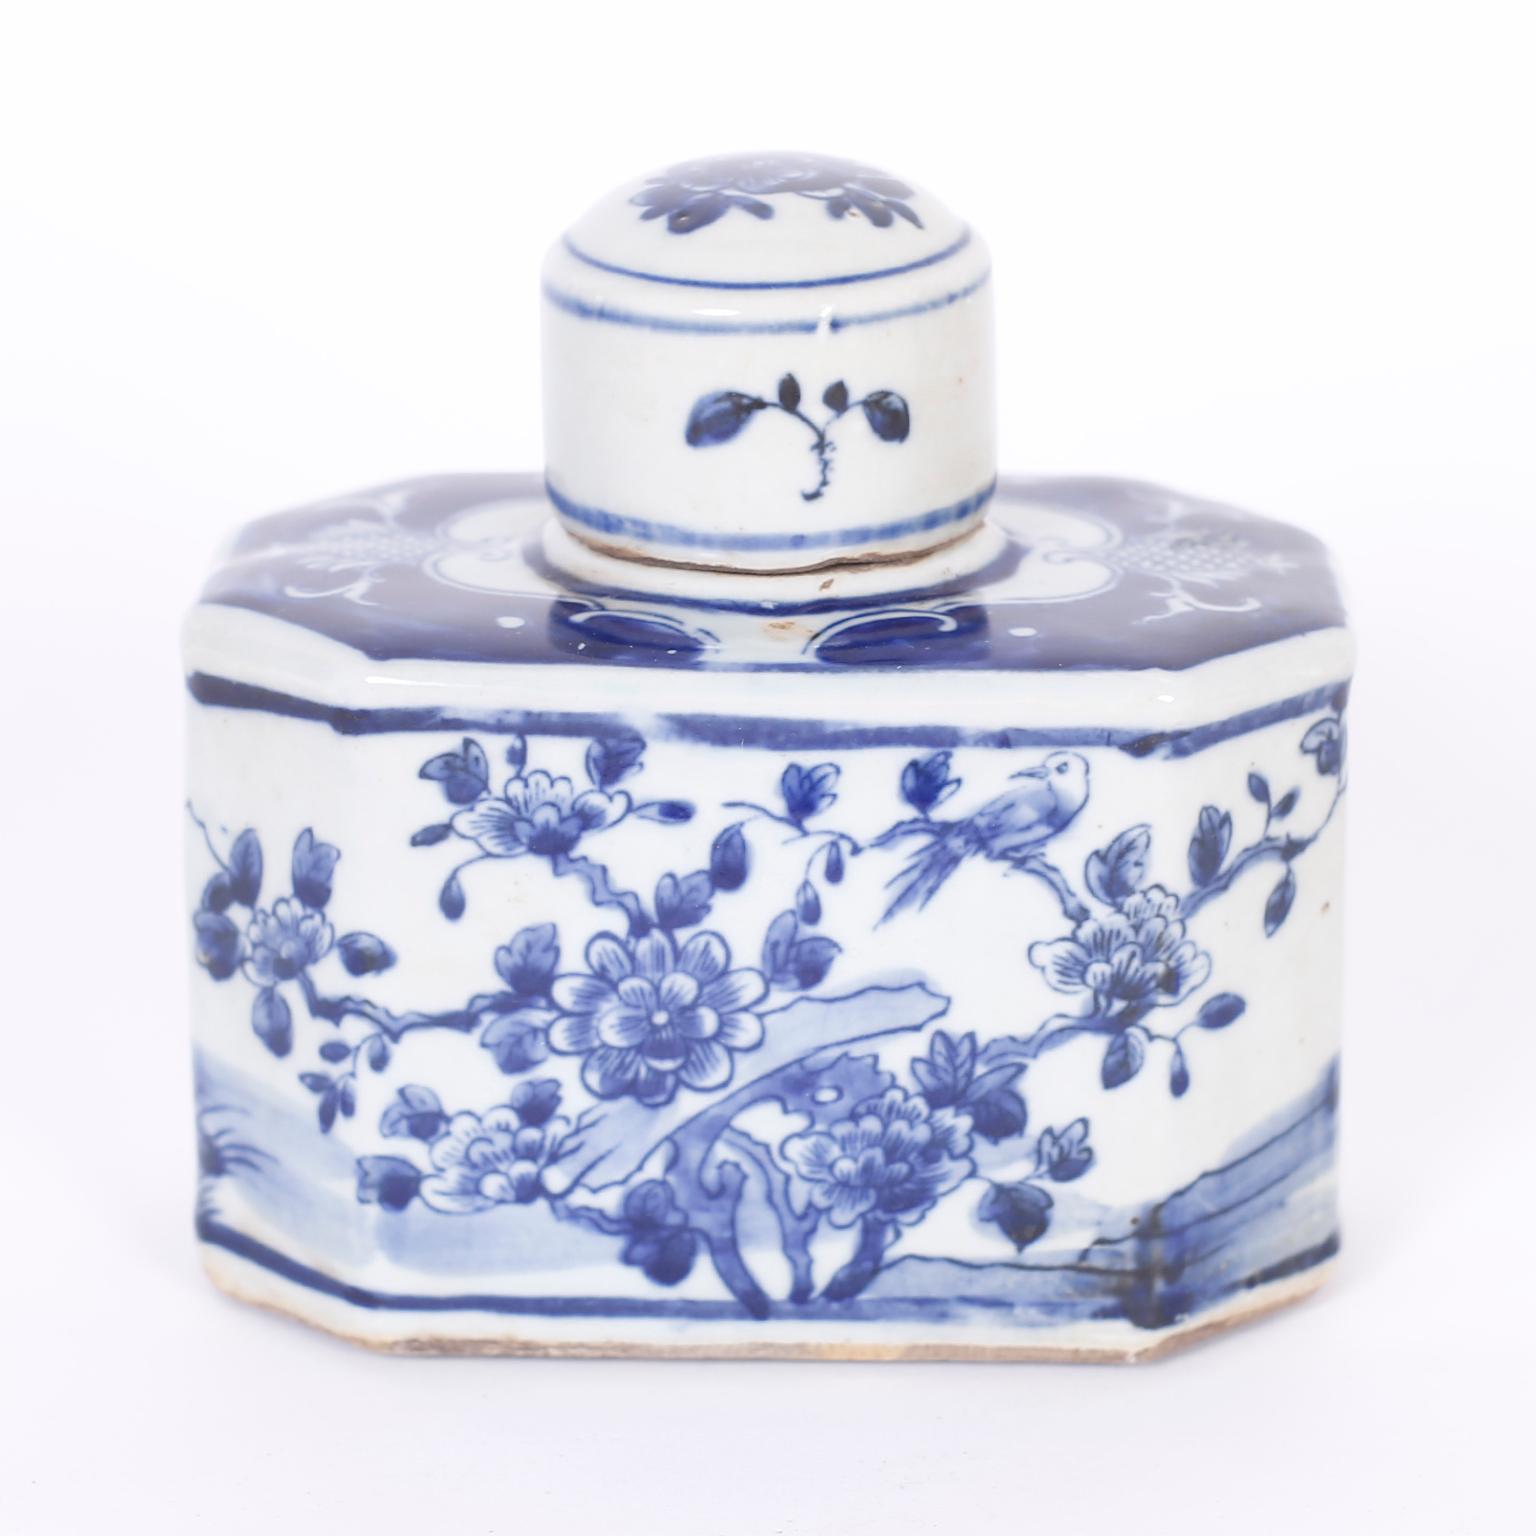 Pair of classic Chinese blue and white porcelain tea caddies with an unusual octagon form hand decorated with delicate floral designs.